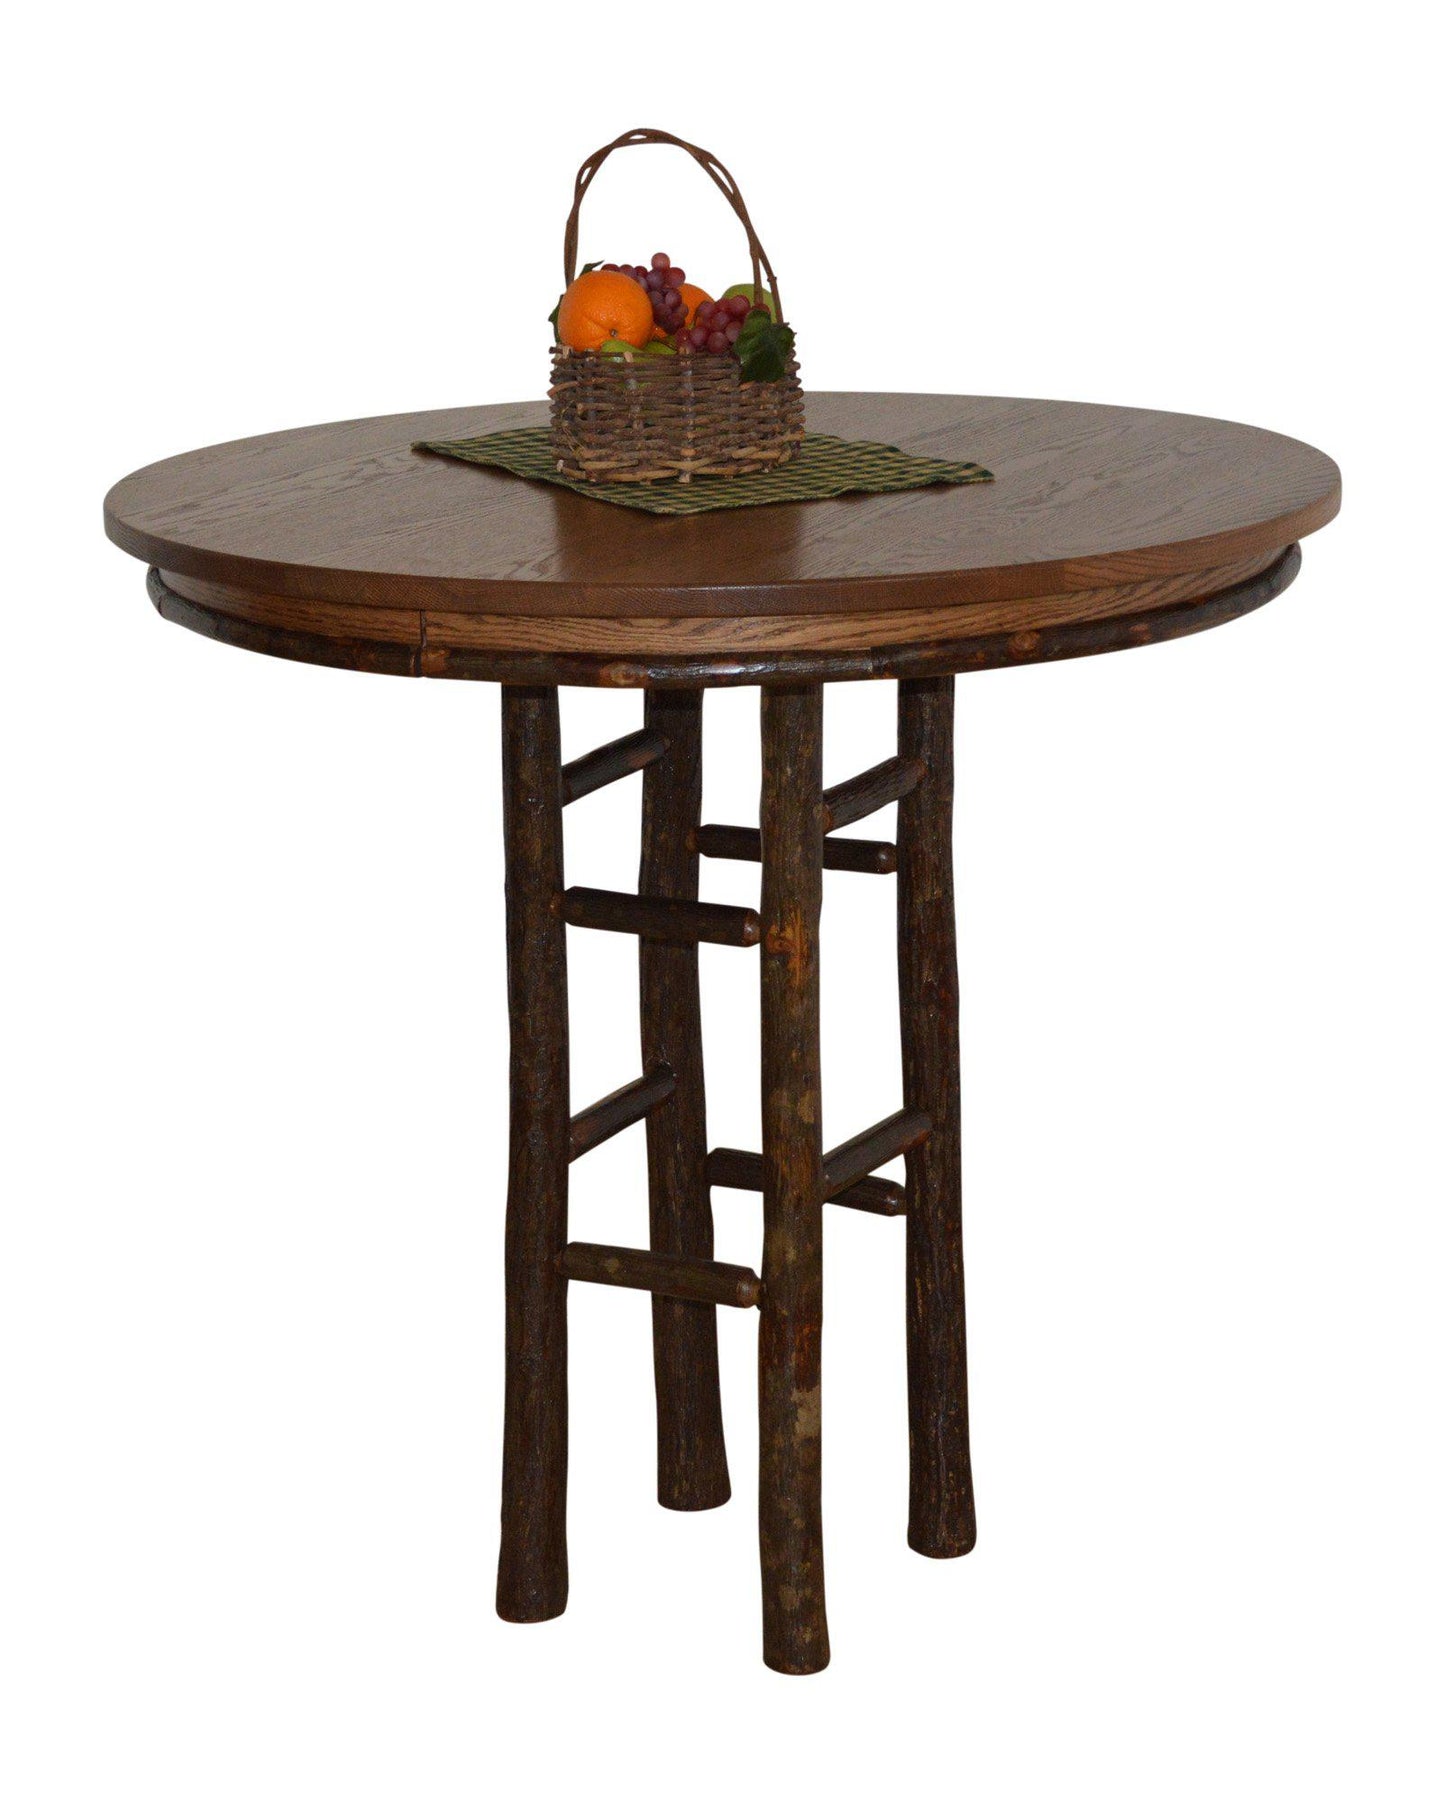 A&L Furniture Co. Hickory 3 Piece 42" Round Bar Table Set - LEAD TIME TO SHIP 4 WEEKS OR LESS